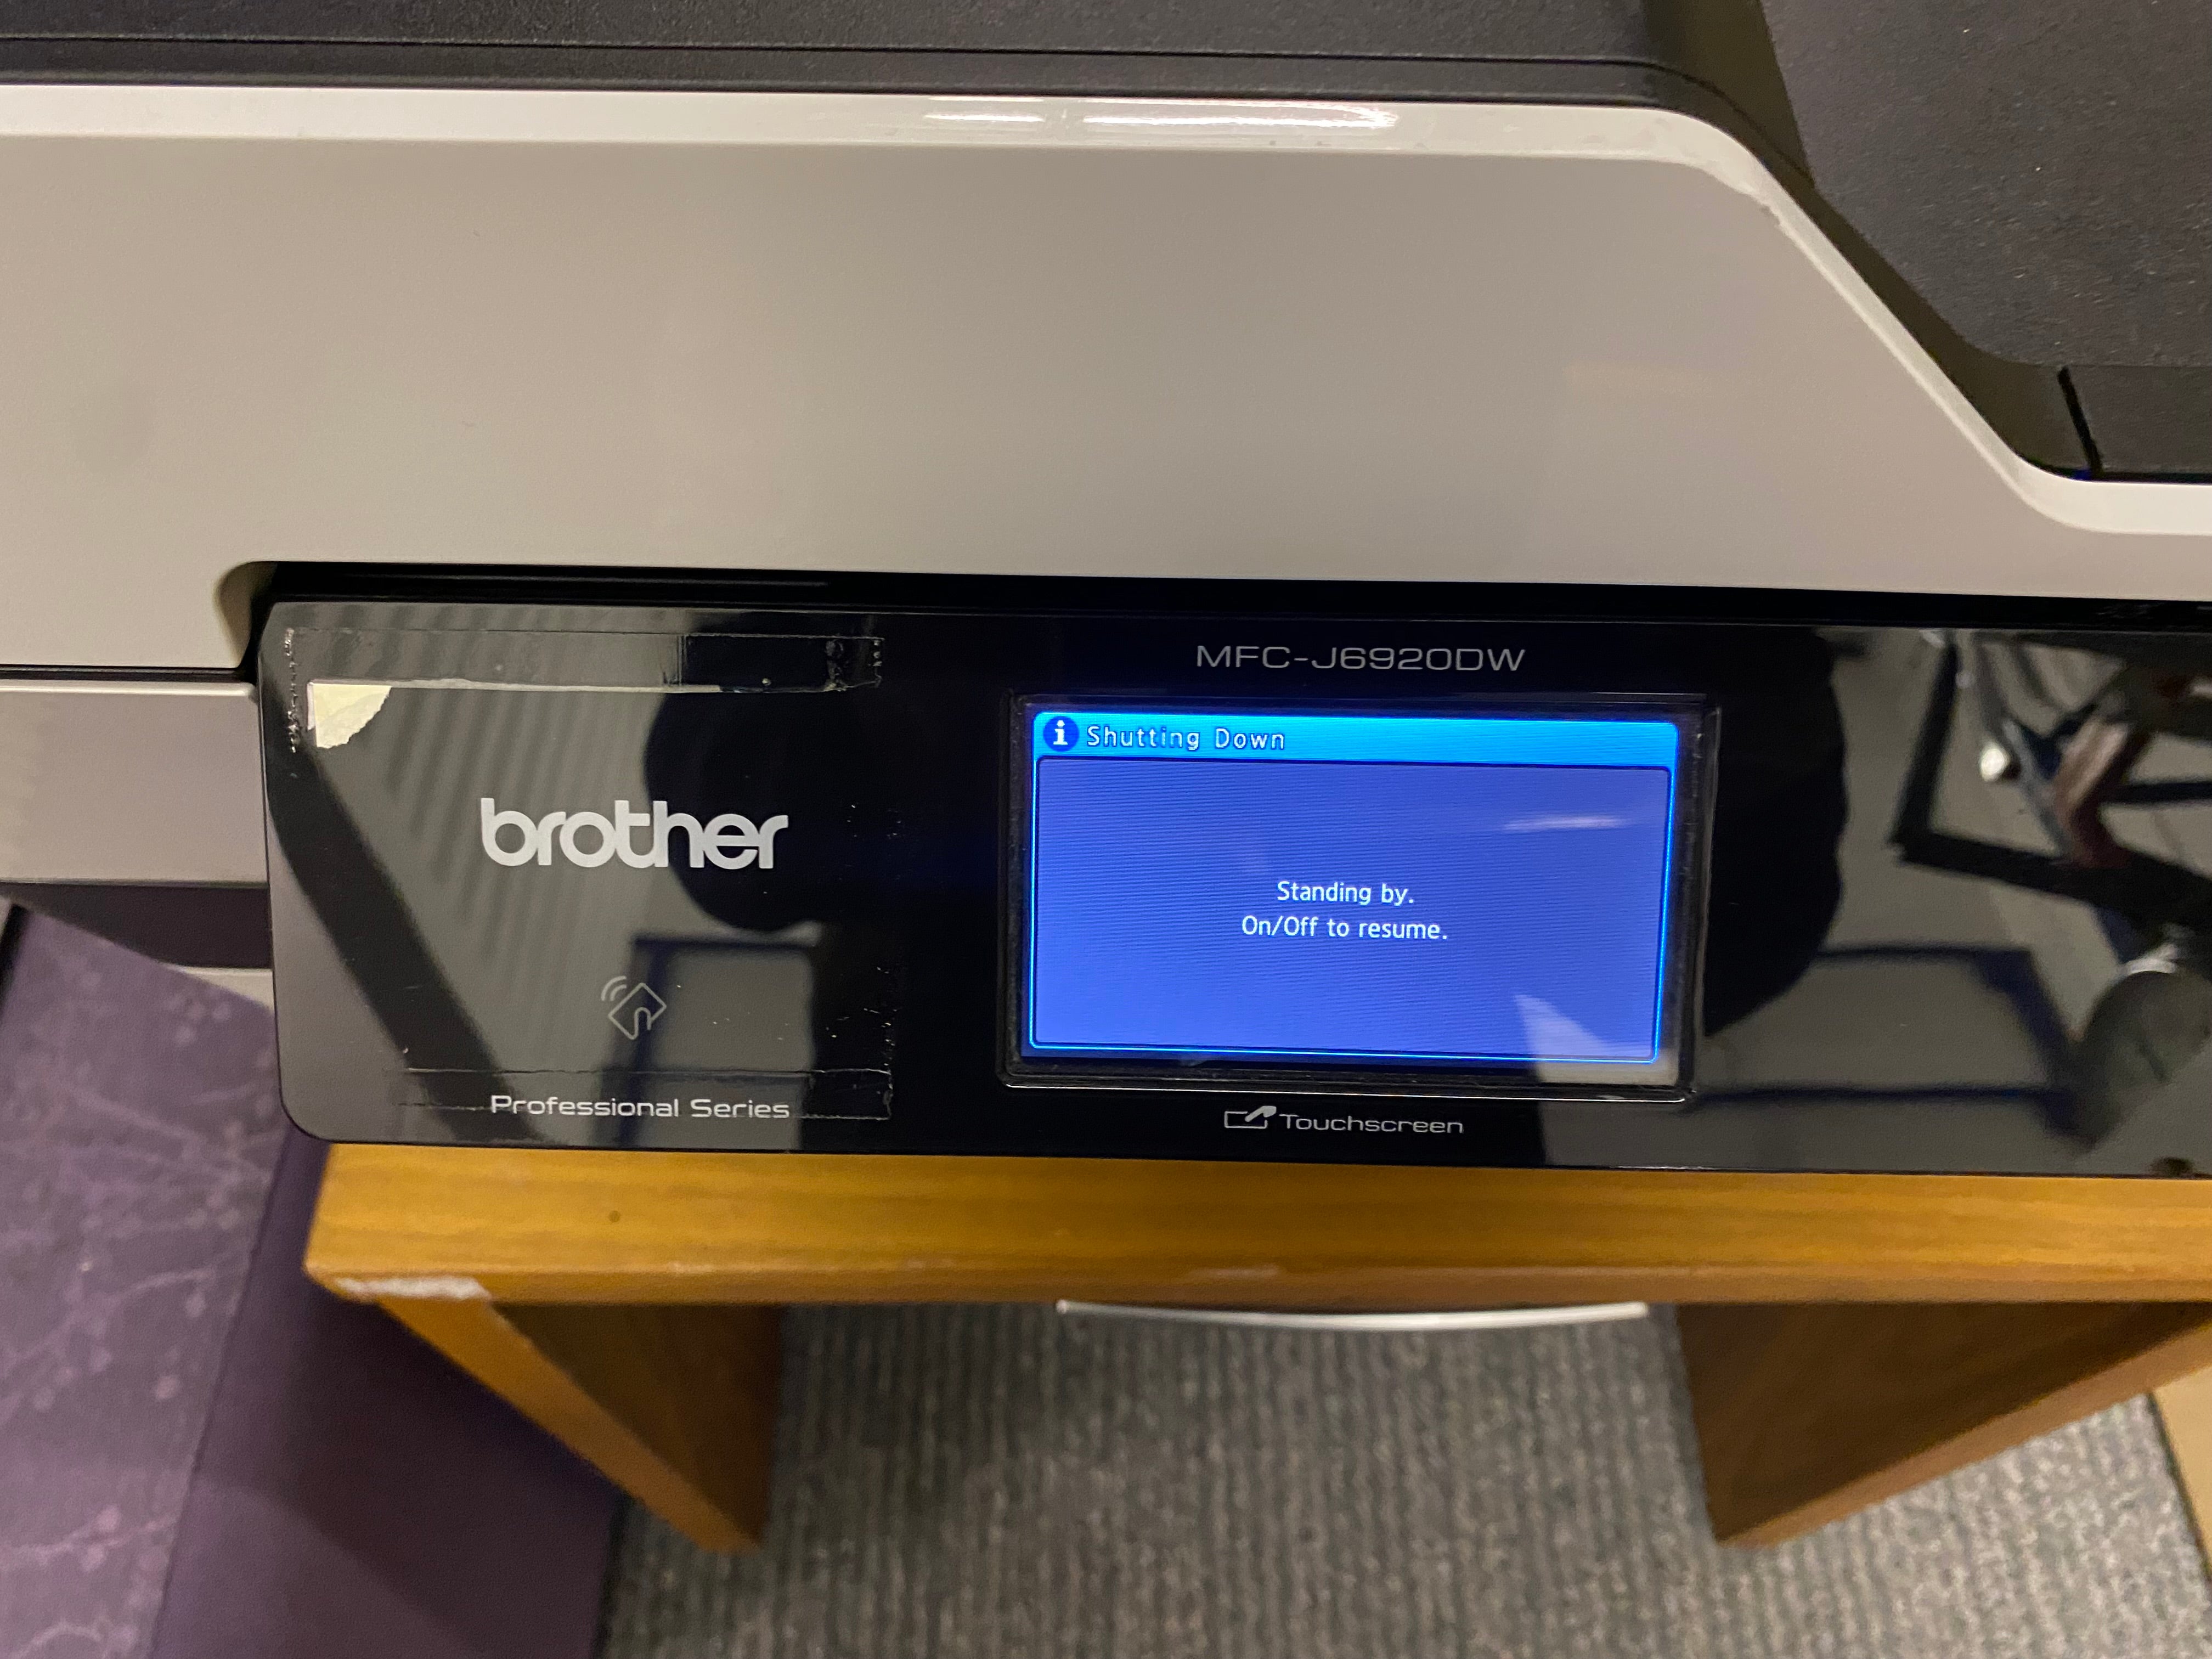 Brother MFC-J6920DW A3 Colour Inkjet Multifunction Printer